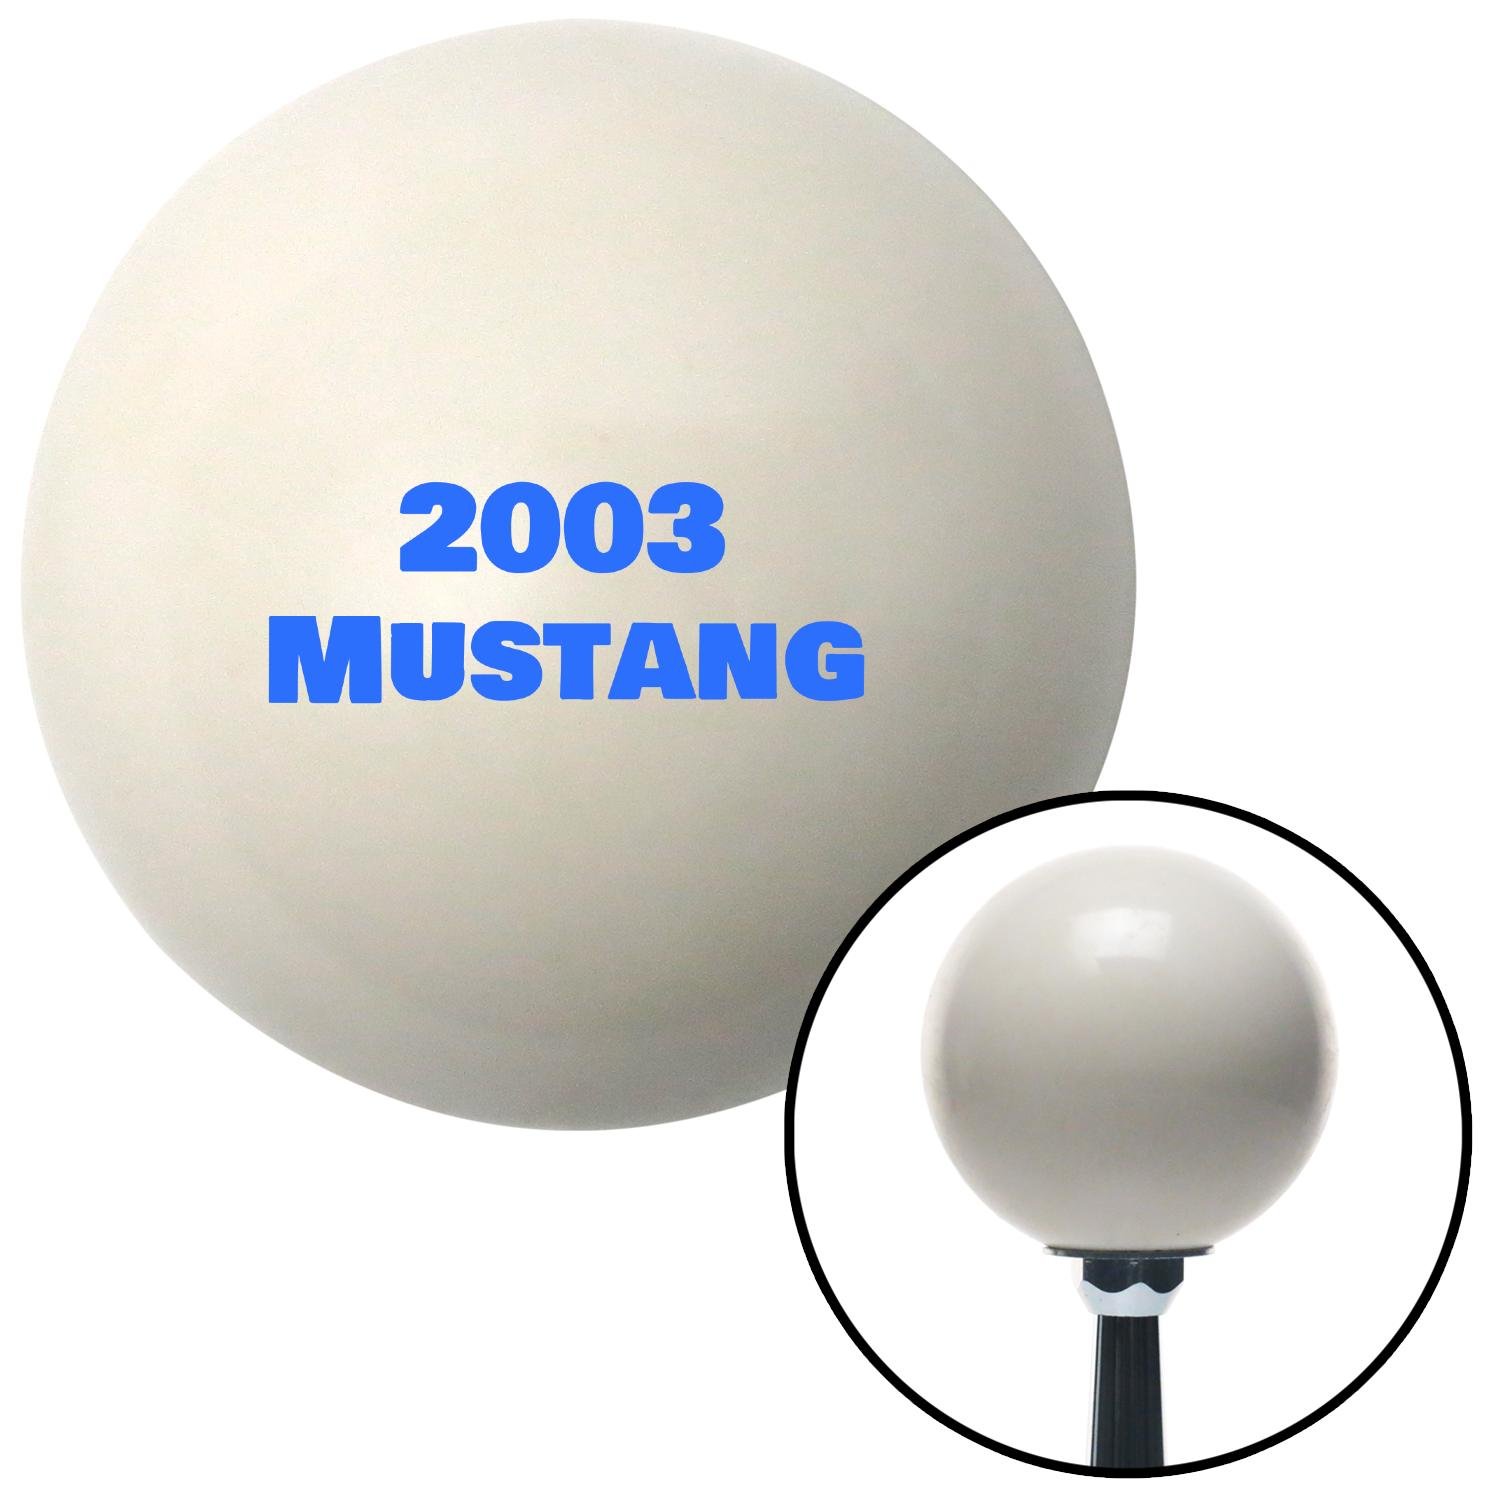 Blue 2003 Mustang American Shifter 140002 Ivory Shift Knob with M16 x 1.5 Insert